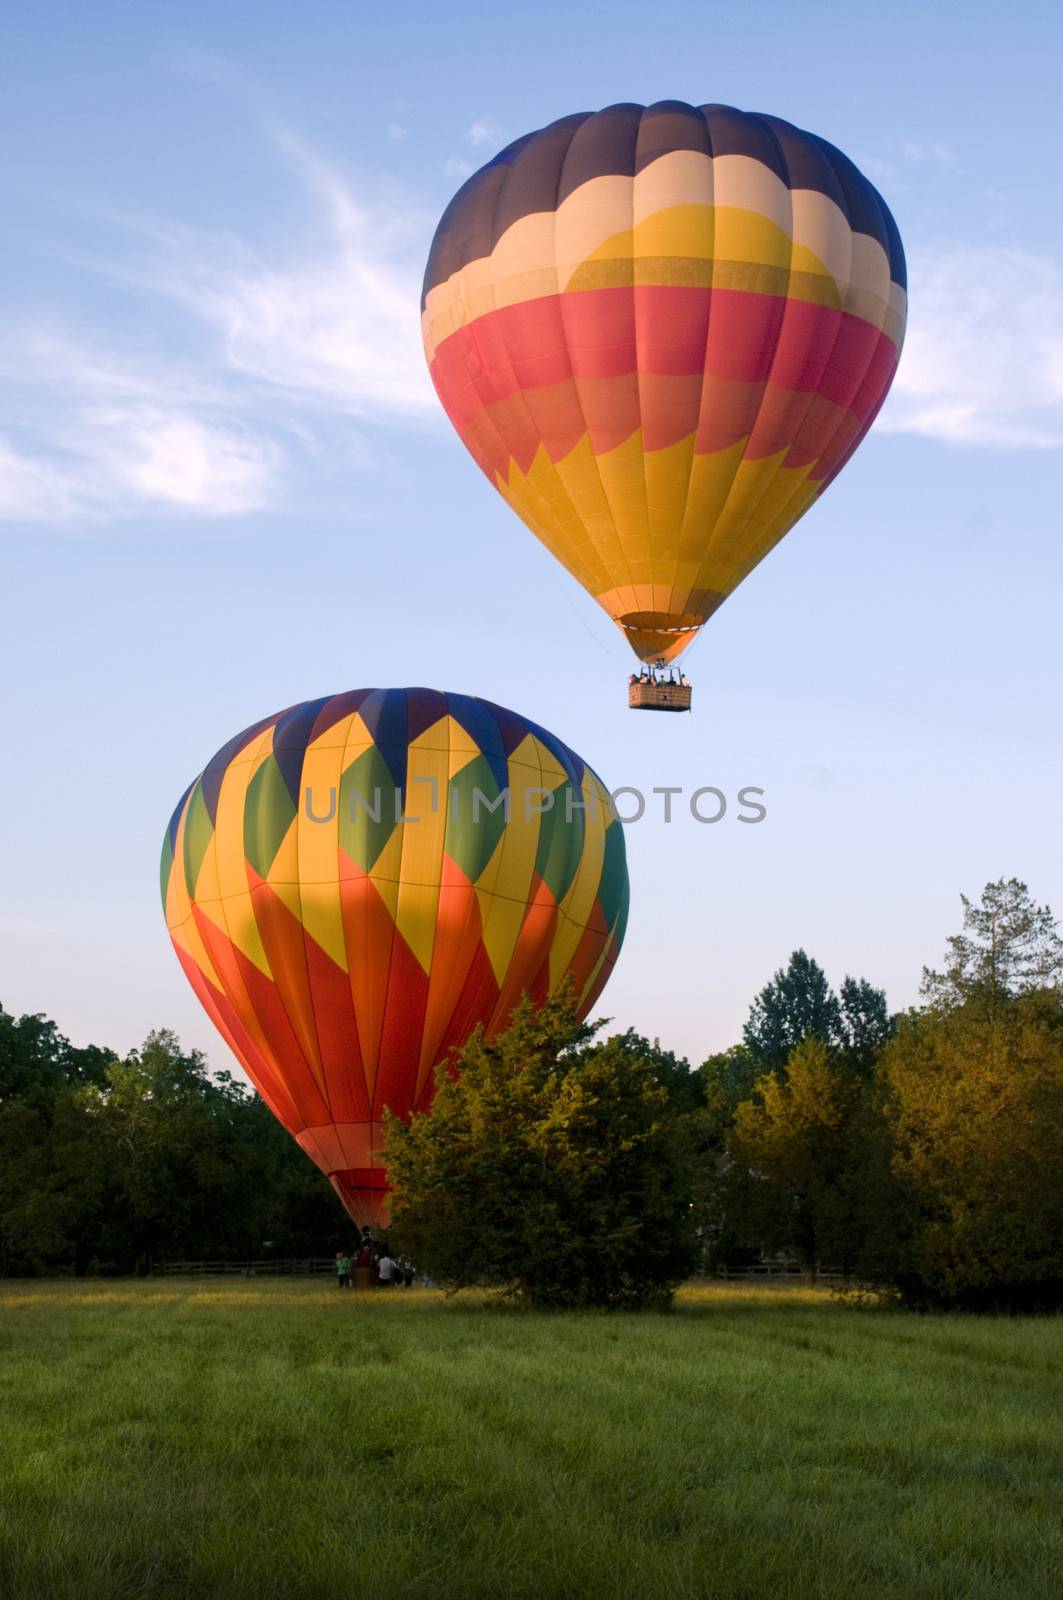 Two hot-air balloons taking off or landing in a field. One is on the ground. The other is airborne.